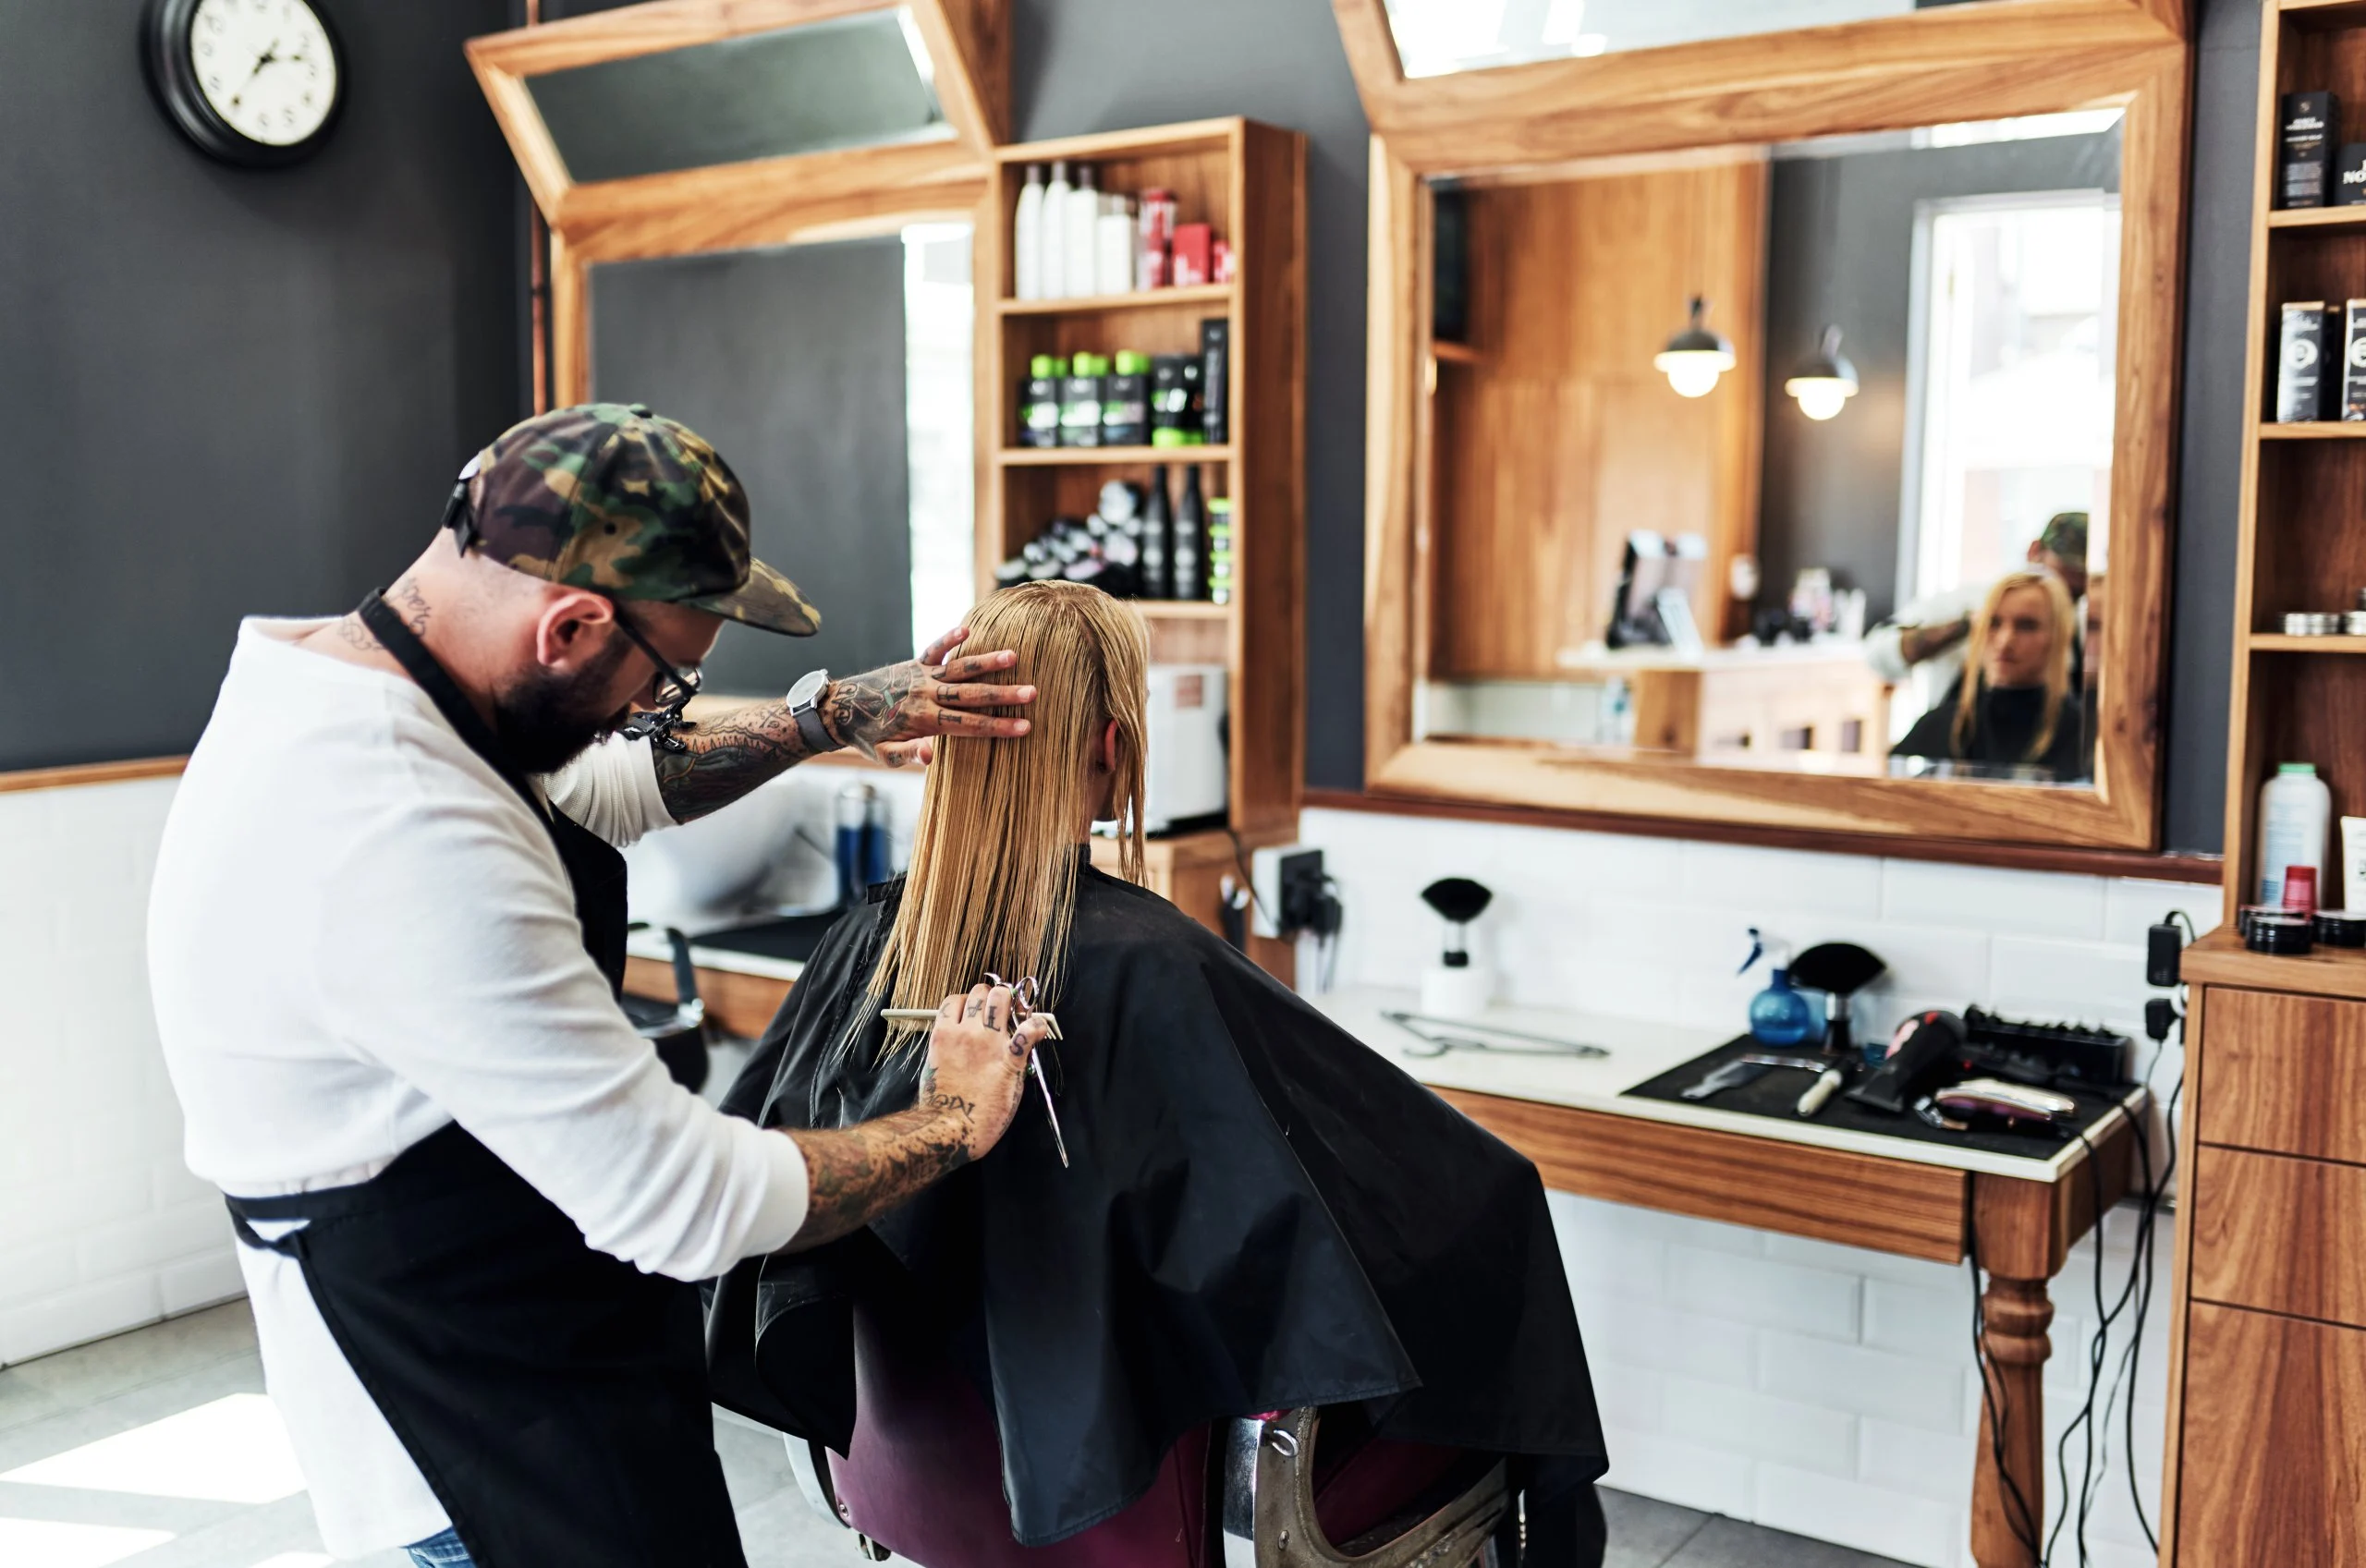 The Best Business Loan Options for Beauty Salons